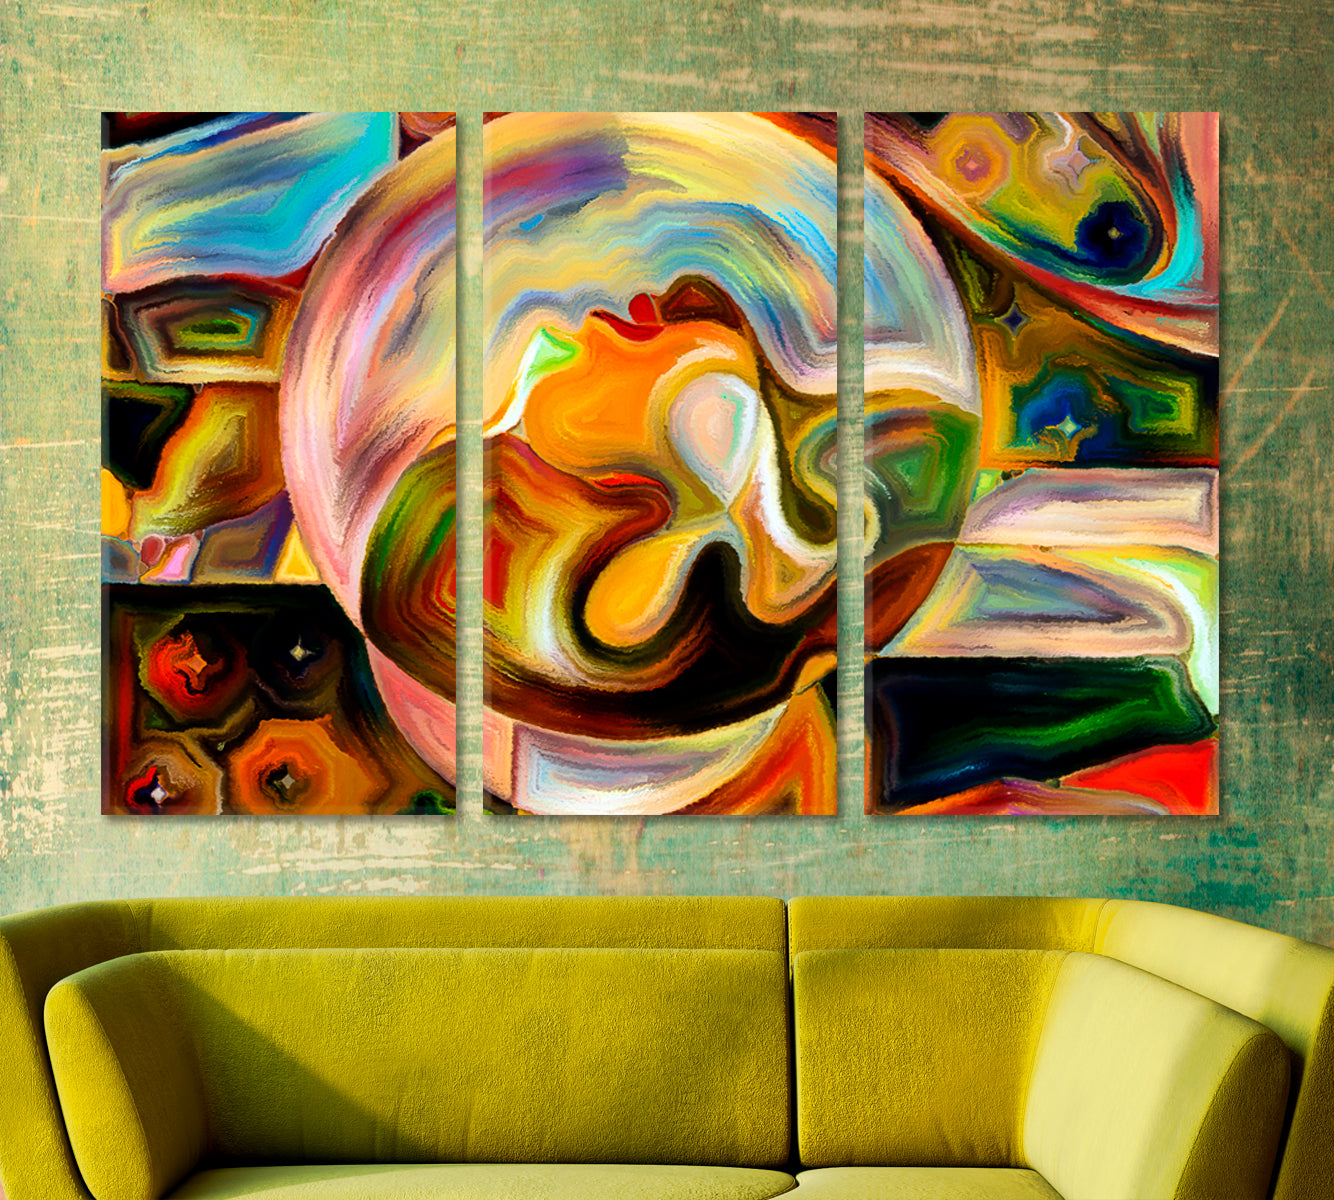 Harmony Microcosm and Macrocosm Colorful Patterns Consciousness Art Artesty 3 panels 36" x 24" 